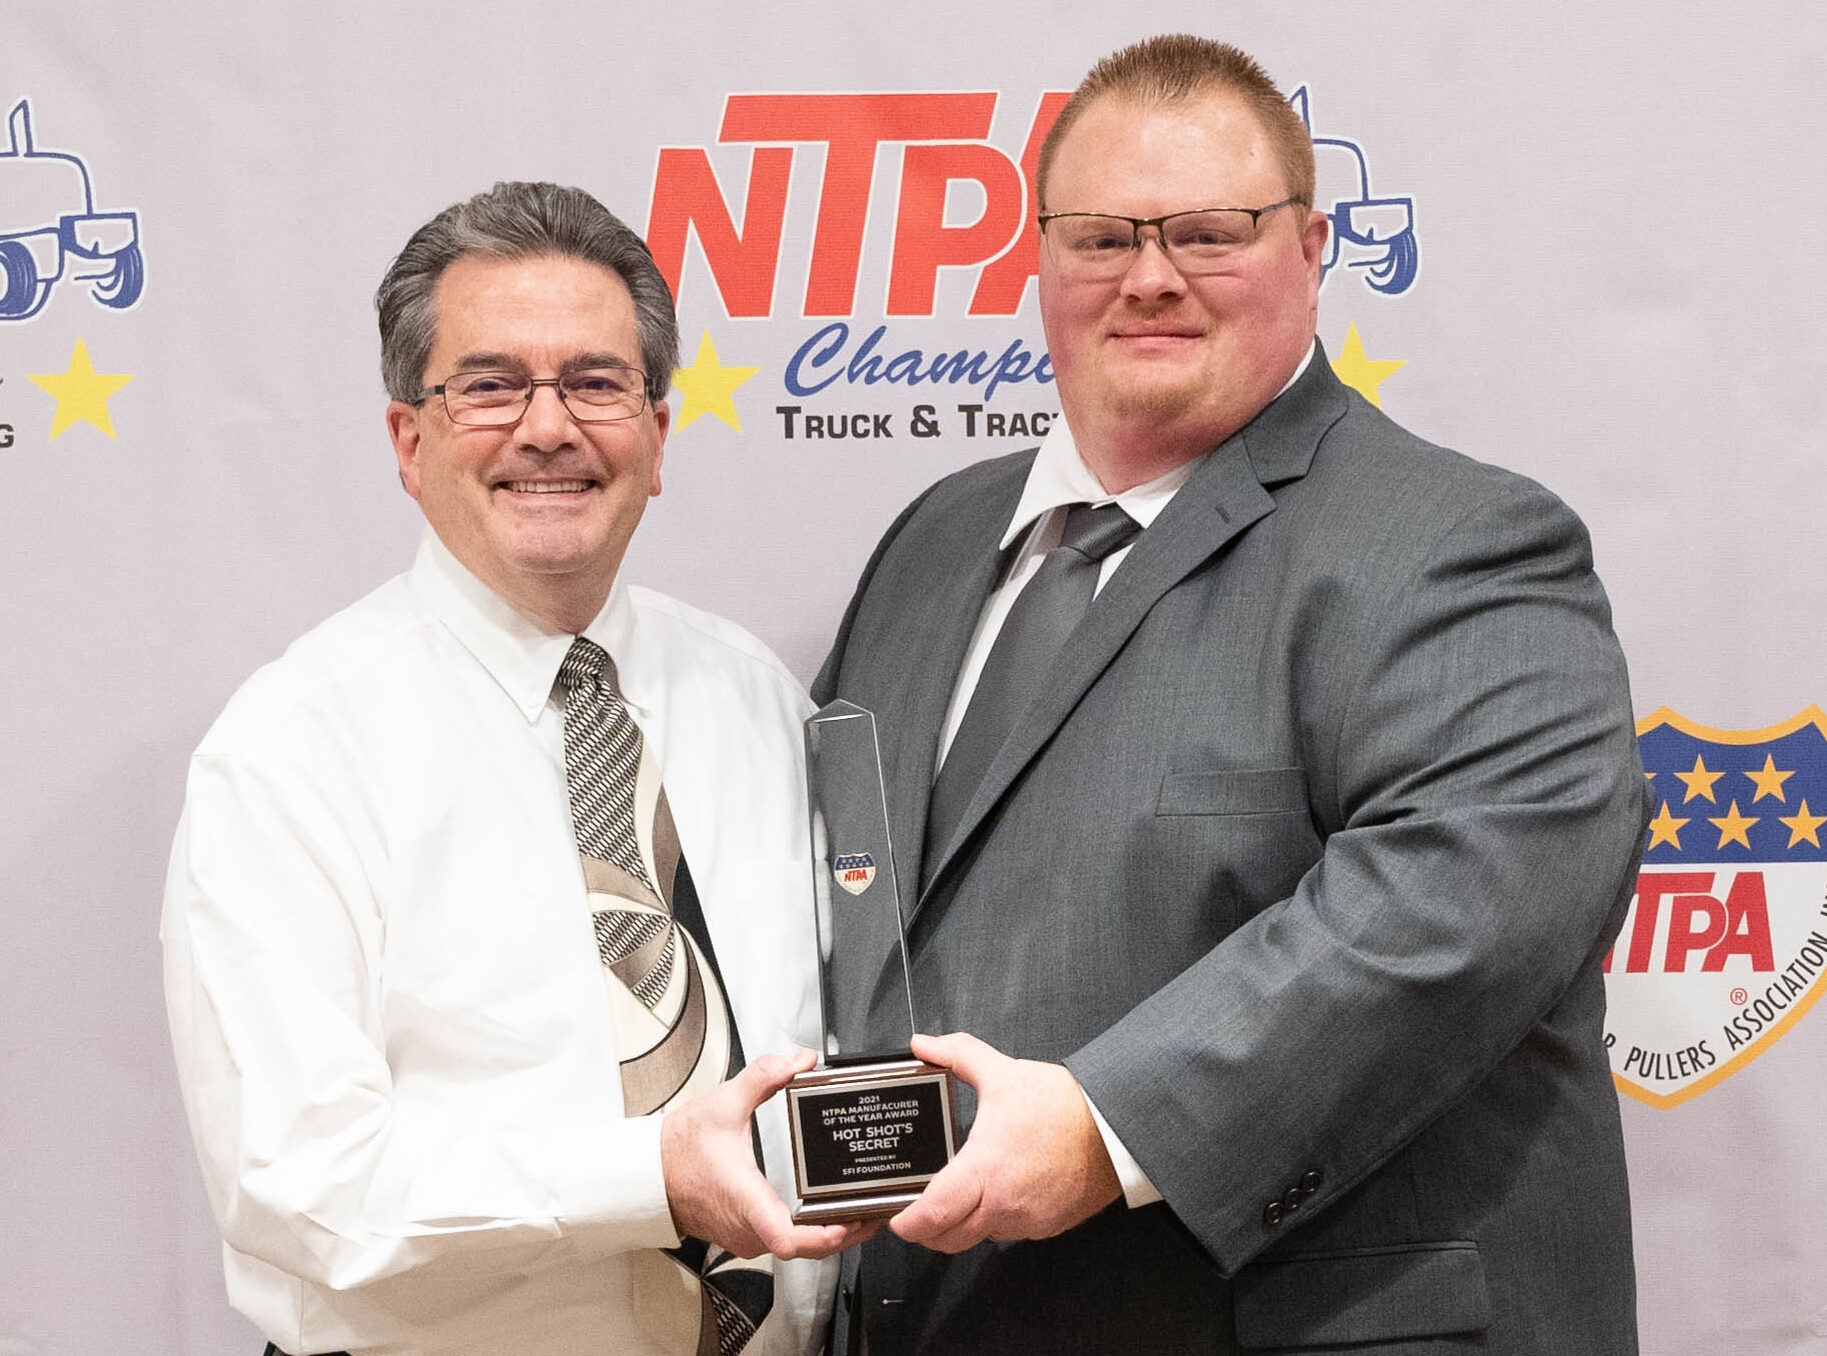 Hot Shot’s Secret Wins National Tractor Pullers Association’s Manufacturer of the Year Award | THE SHOP